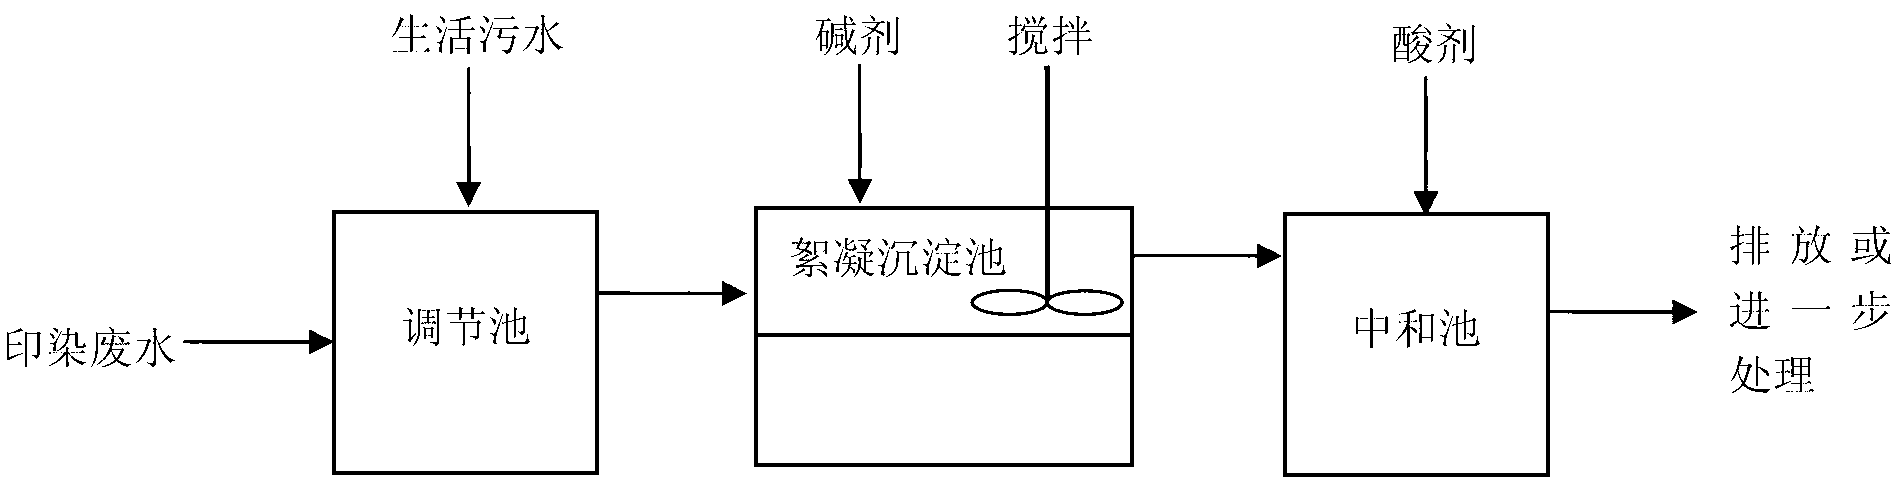 Printing and dyeing wastewater treatment method